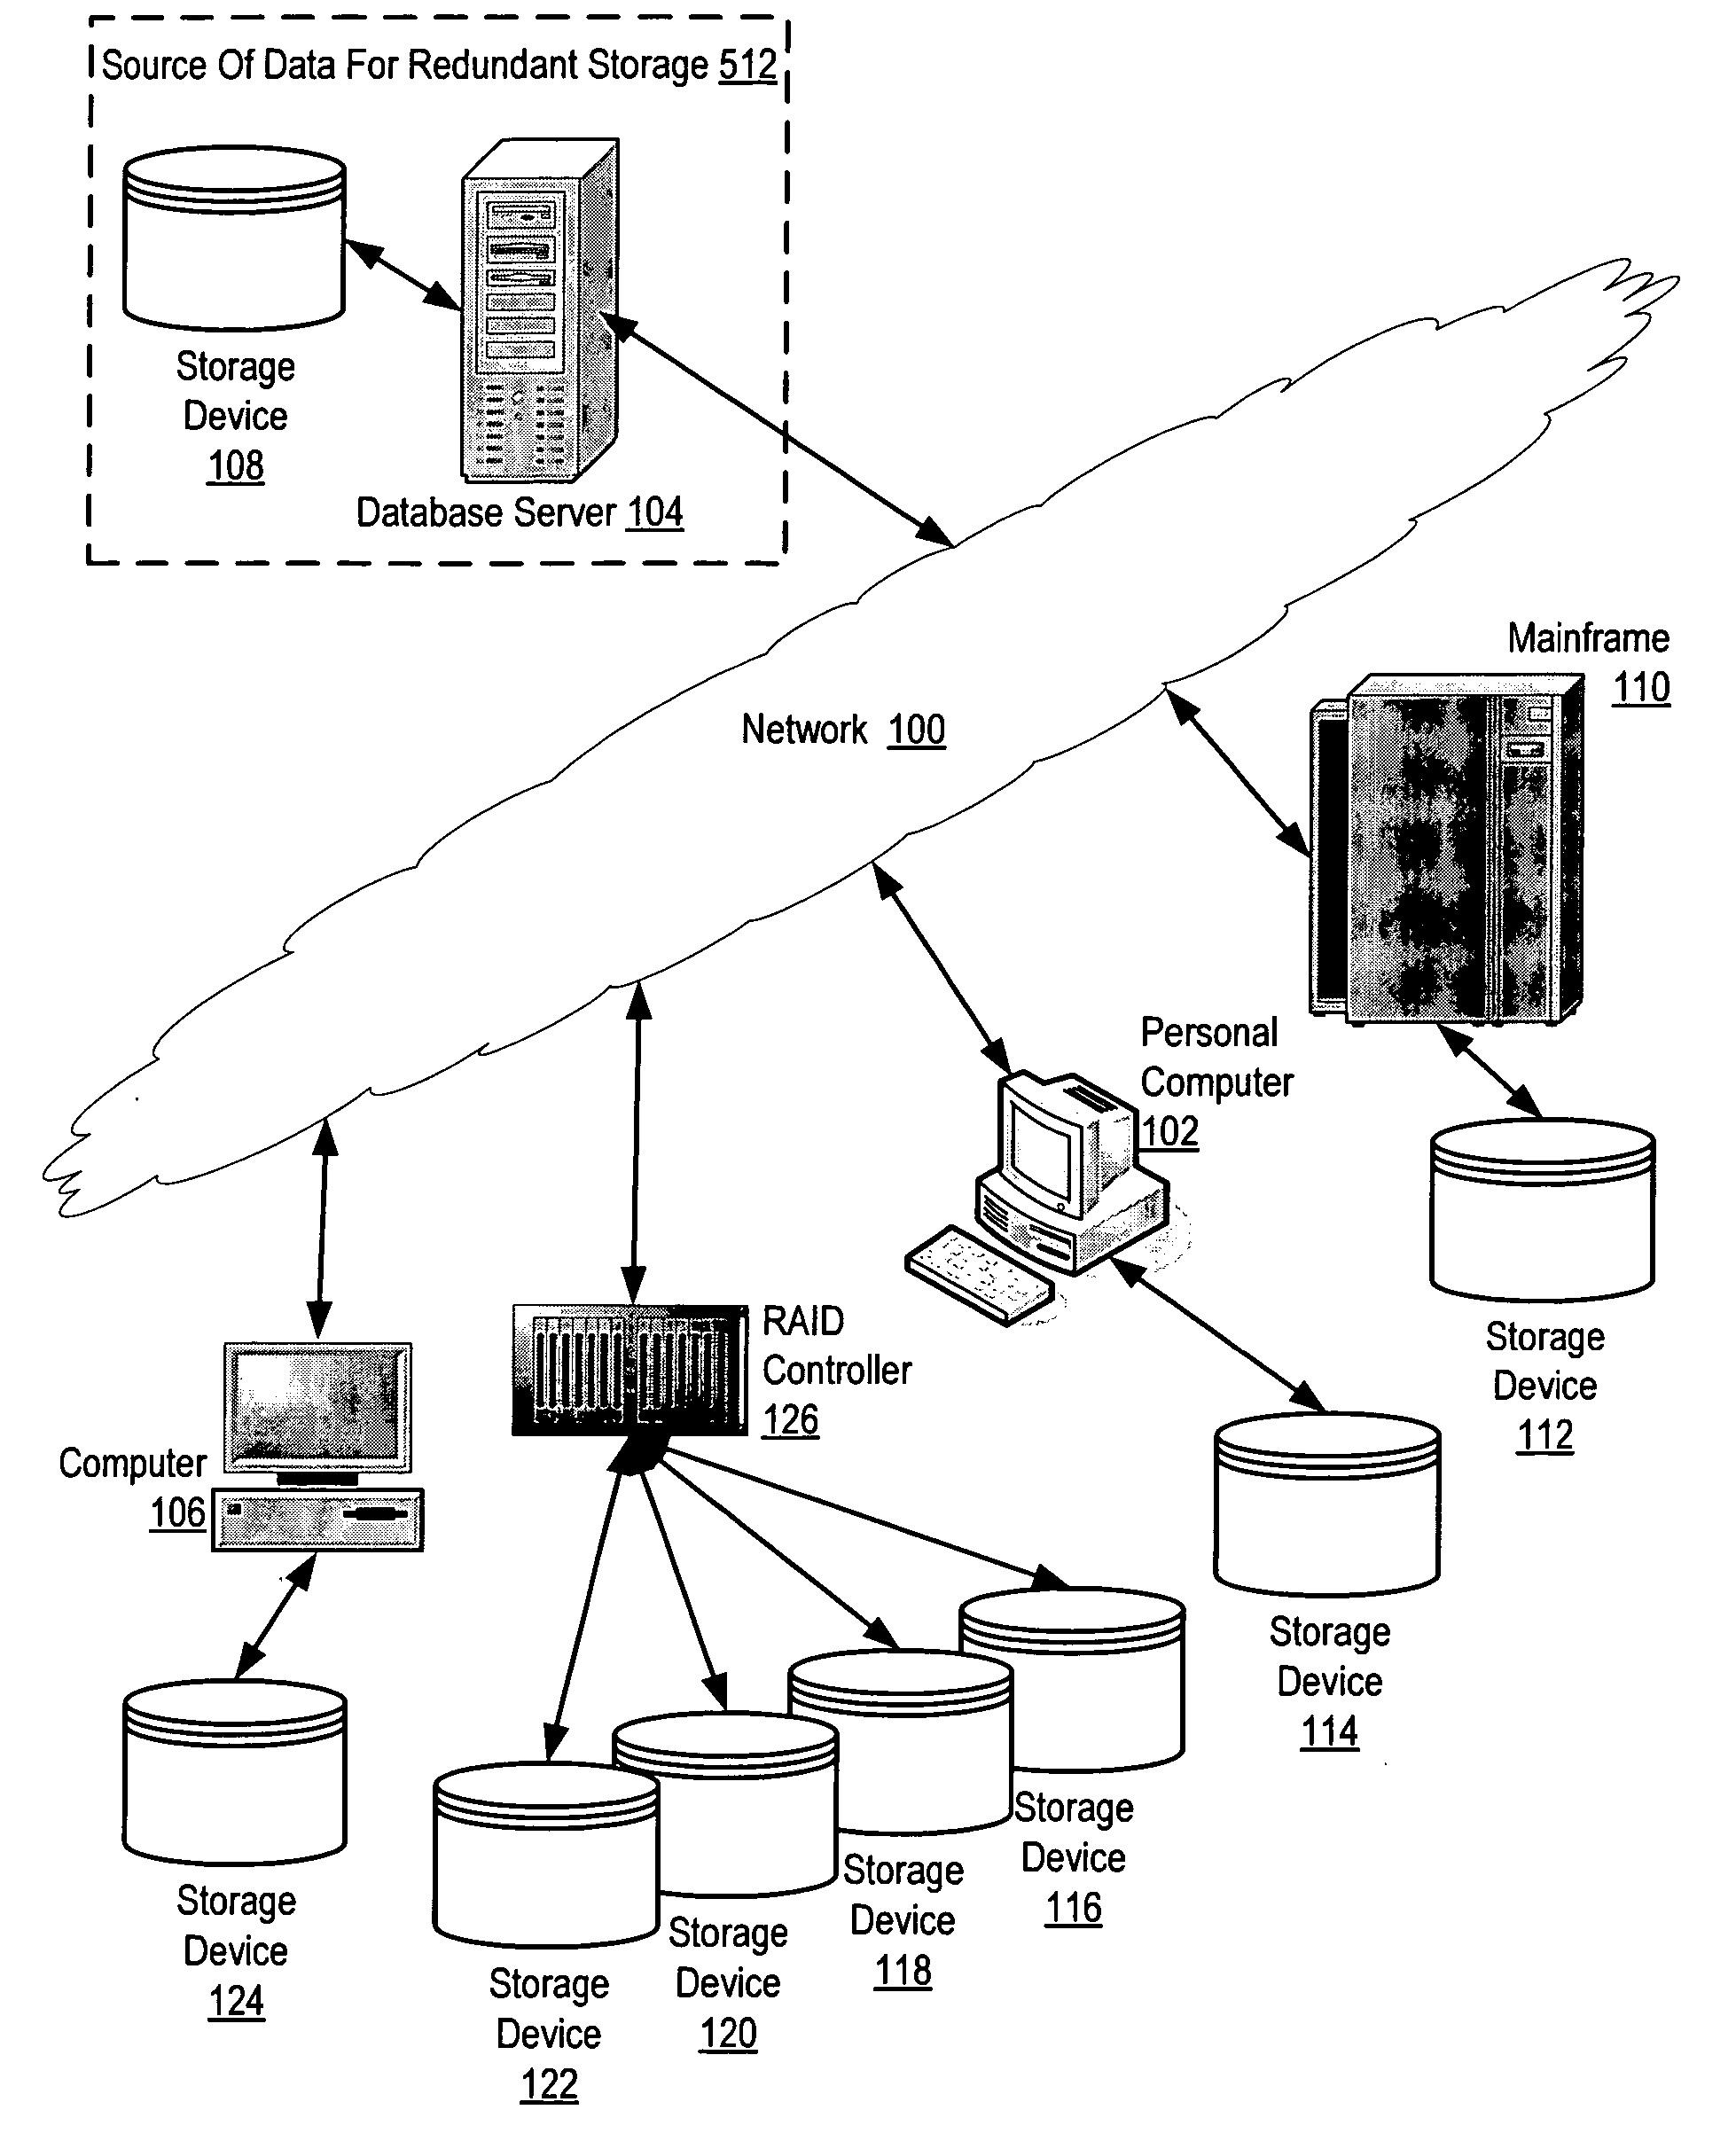 Storage of computer data on data storage devices of differing reliabilities